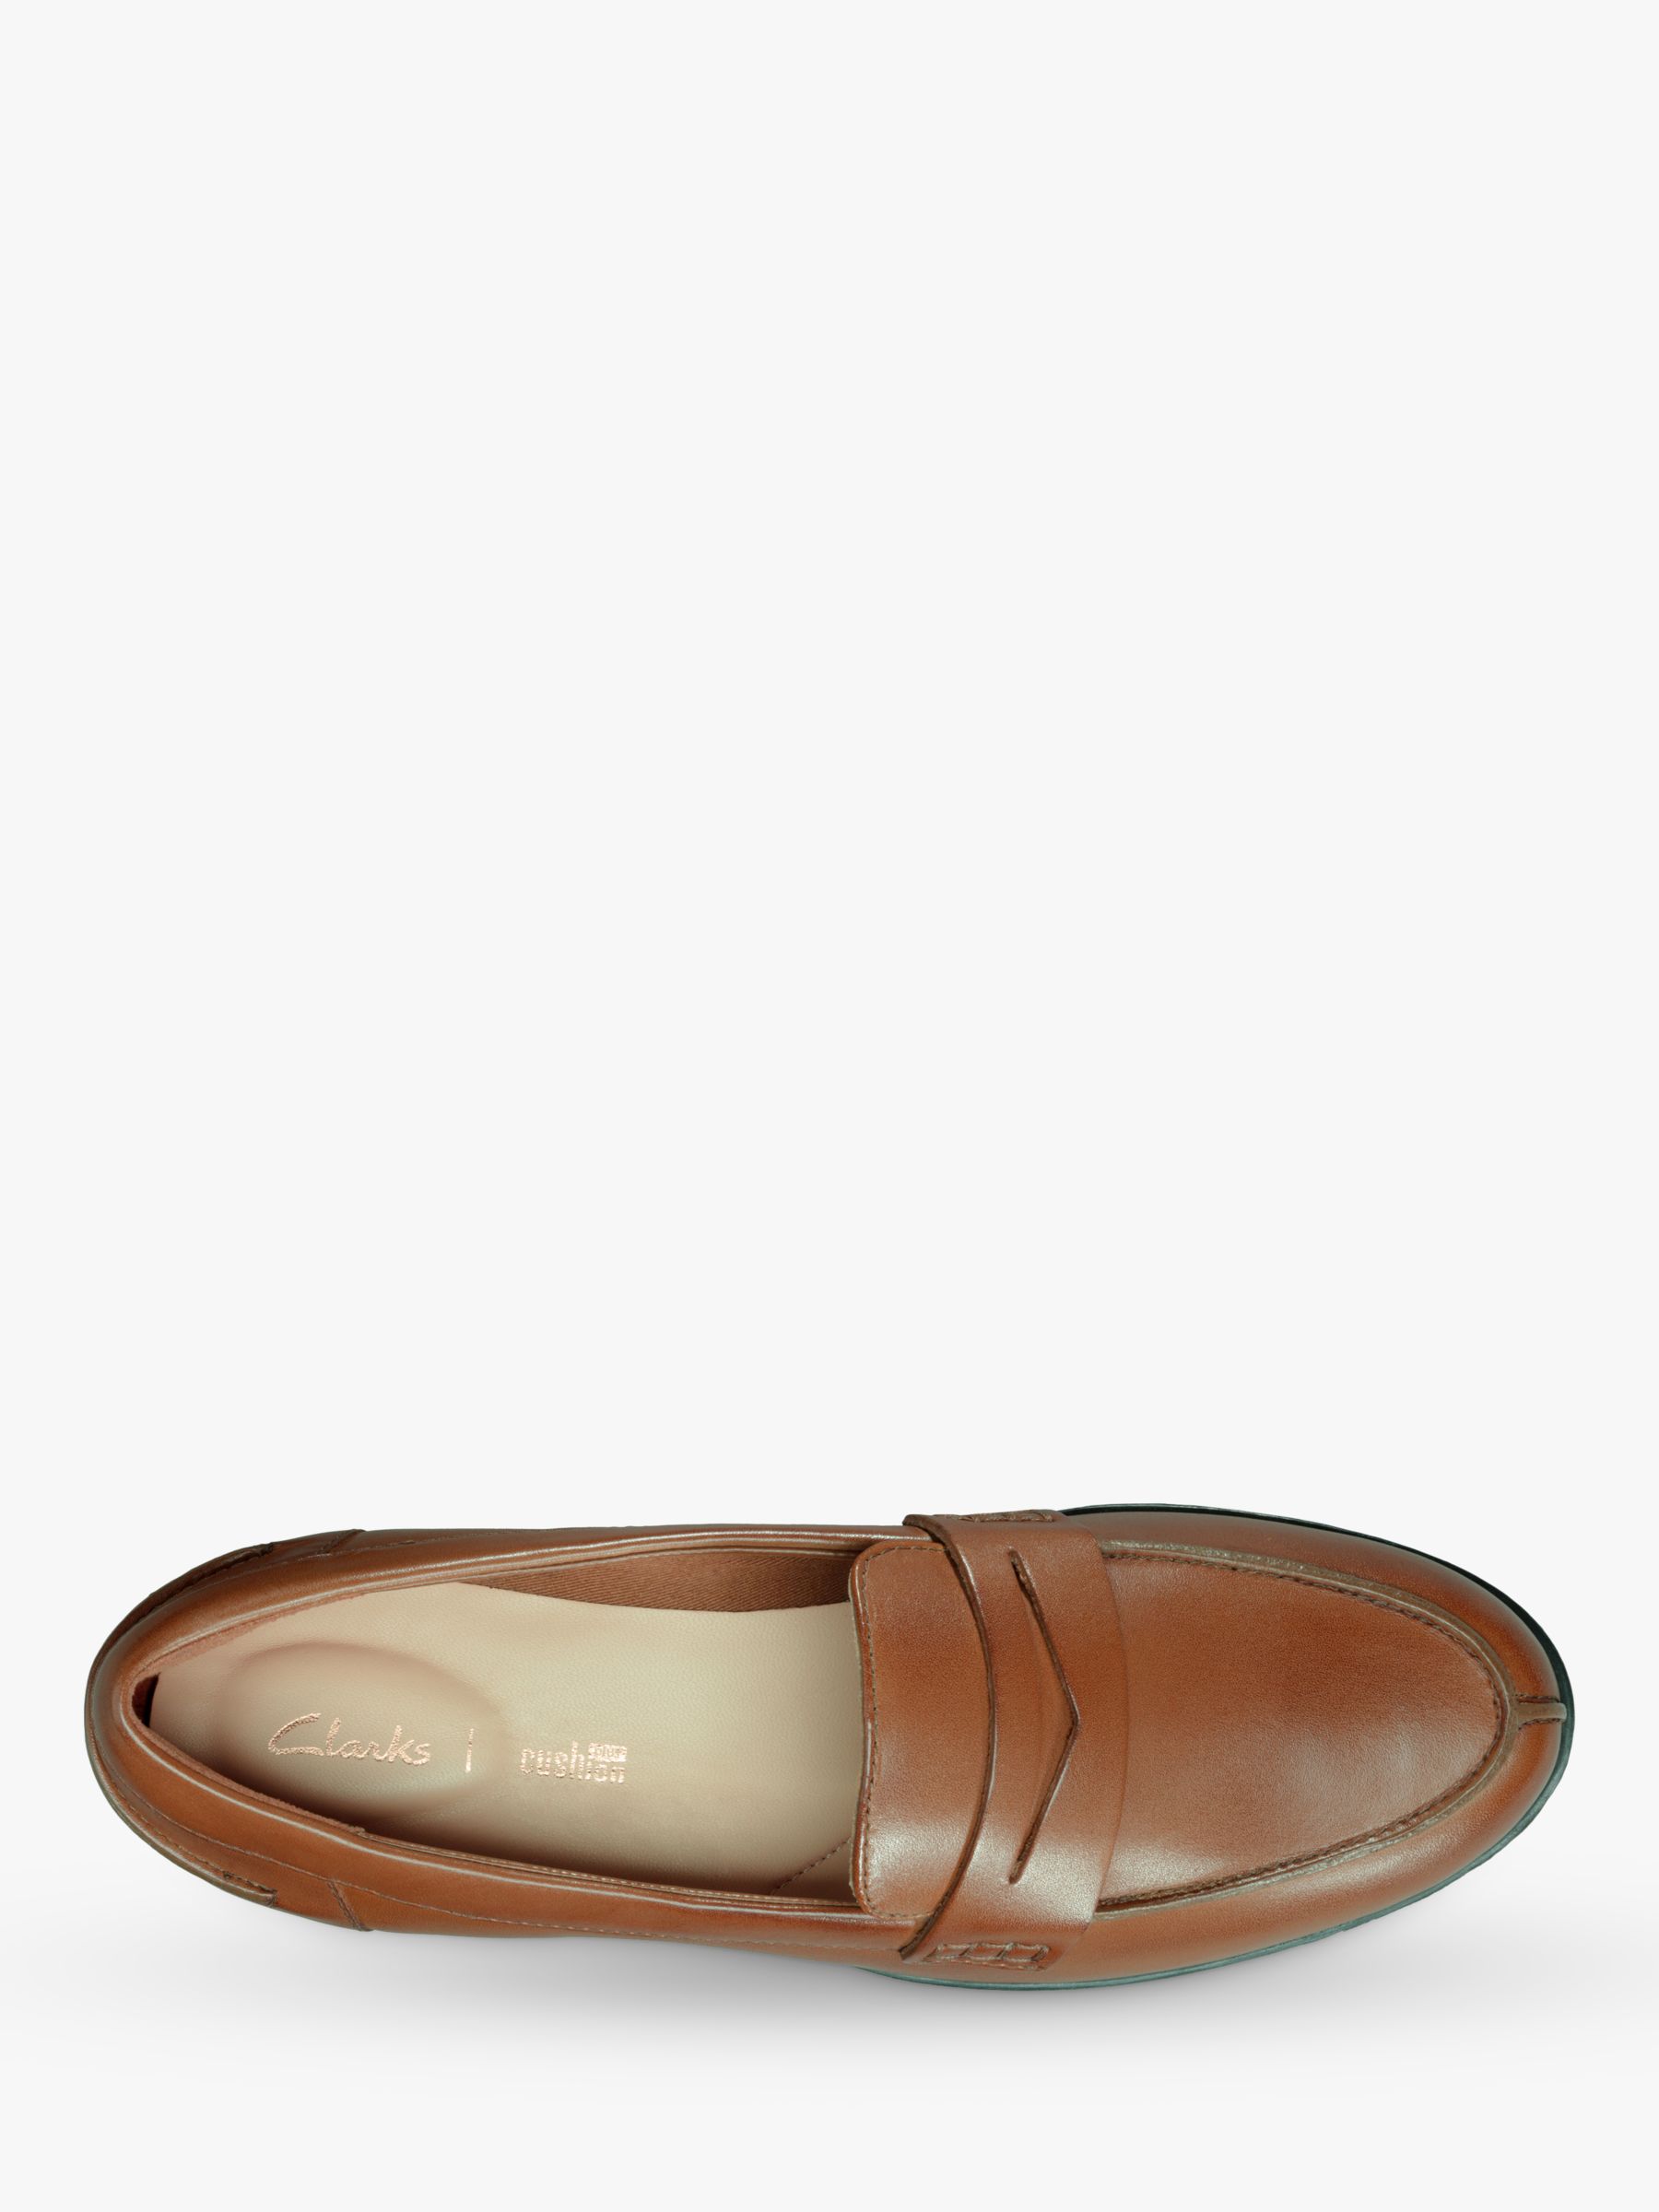 Clarks Leather Loafers, Tan at John Lewis &